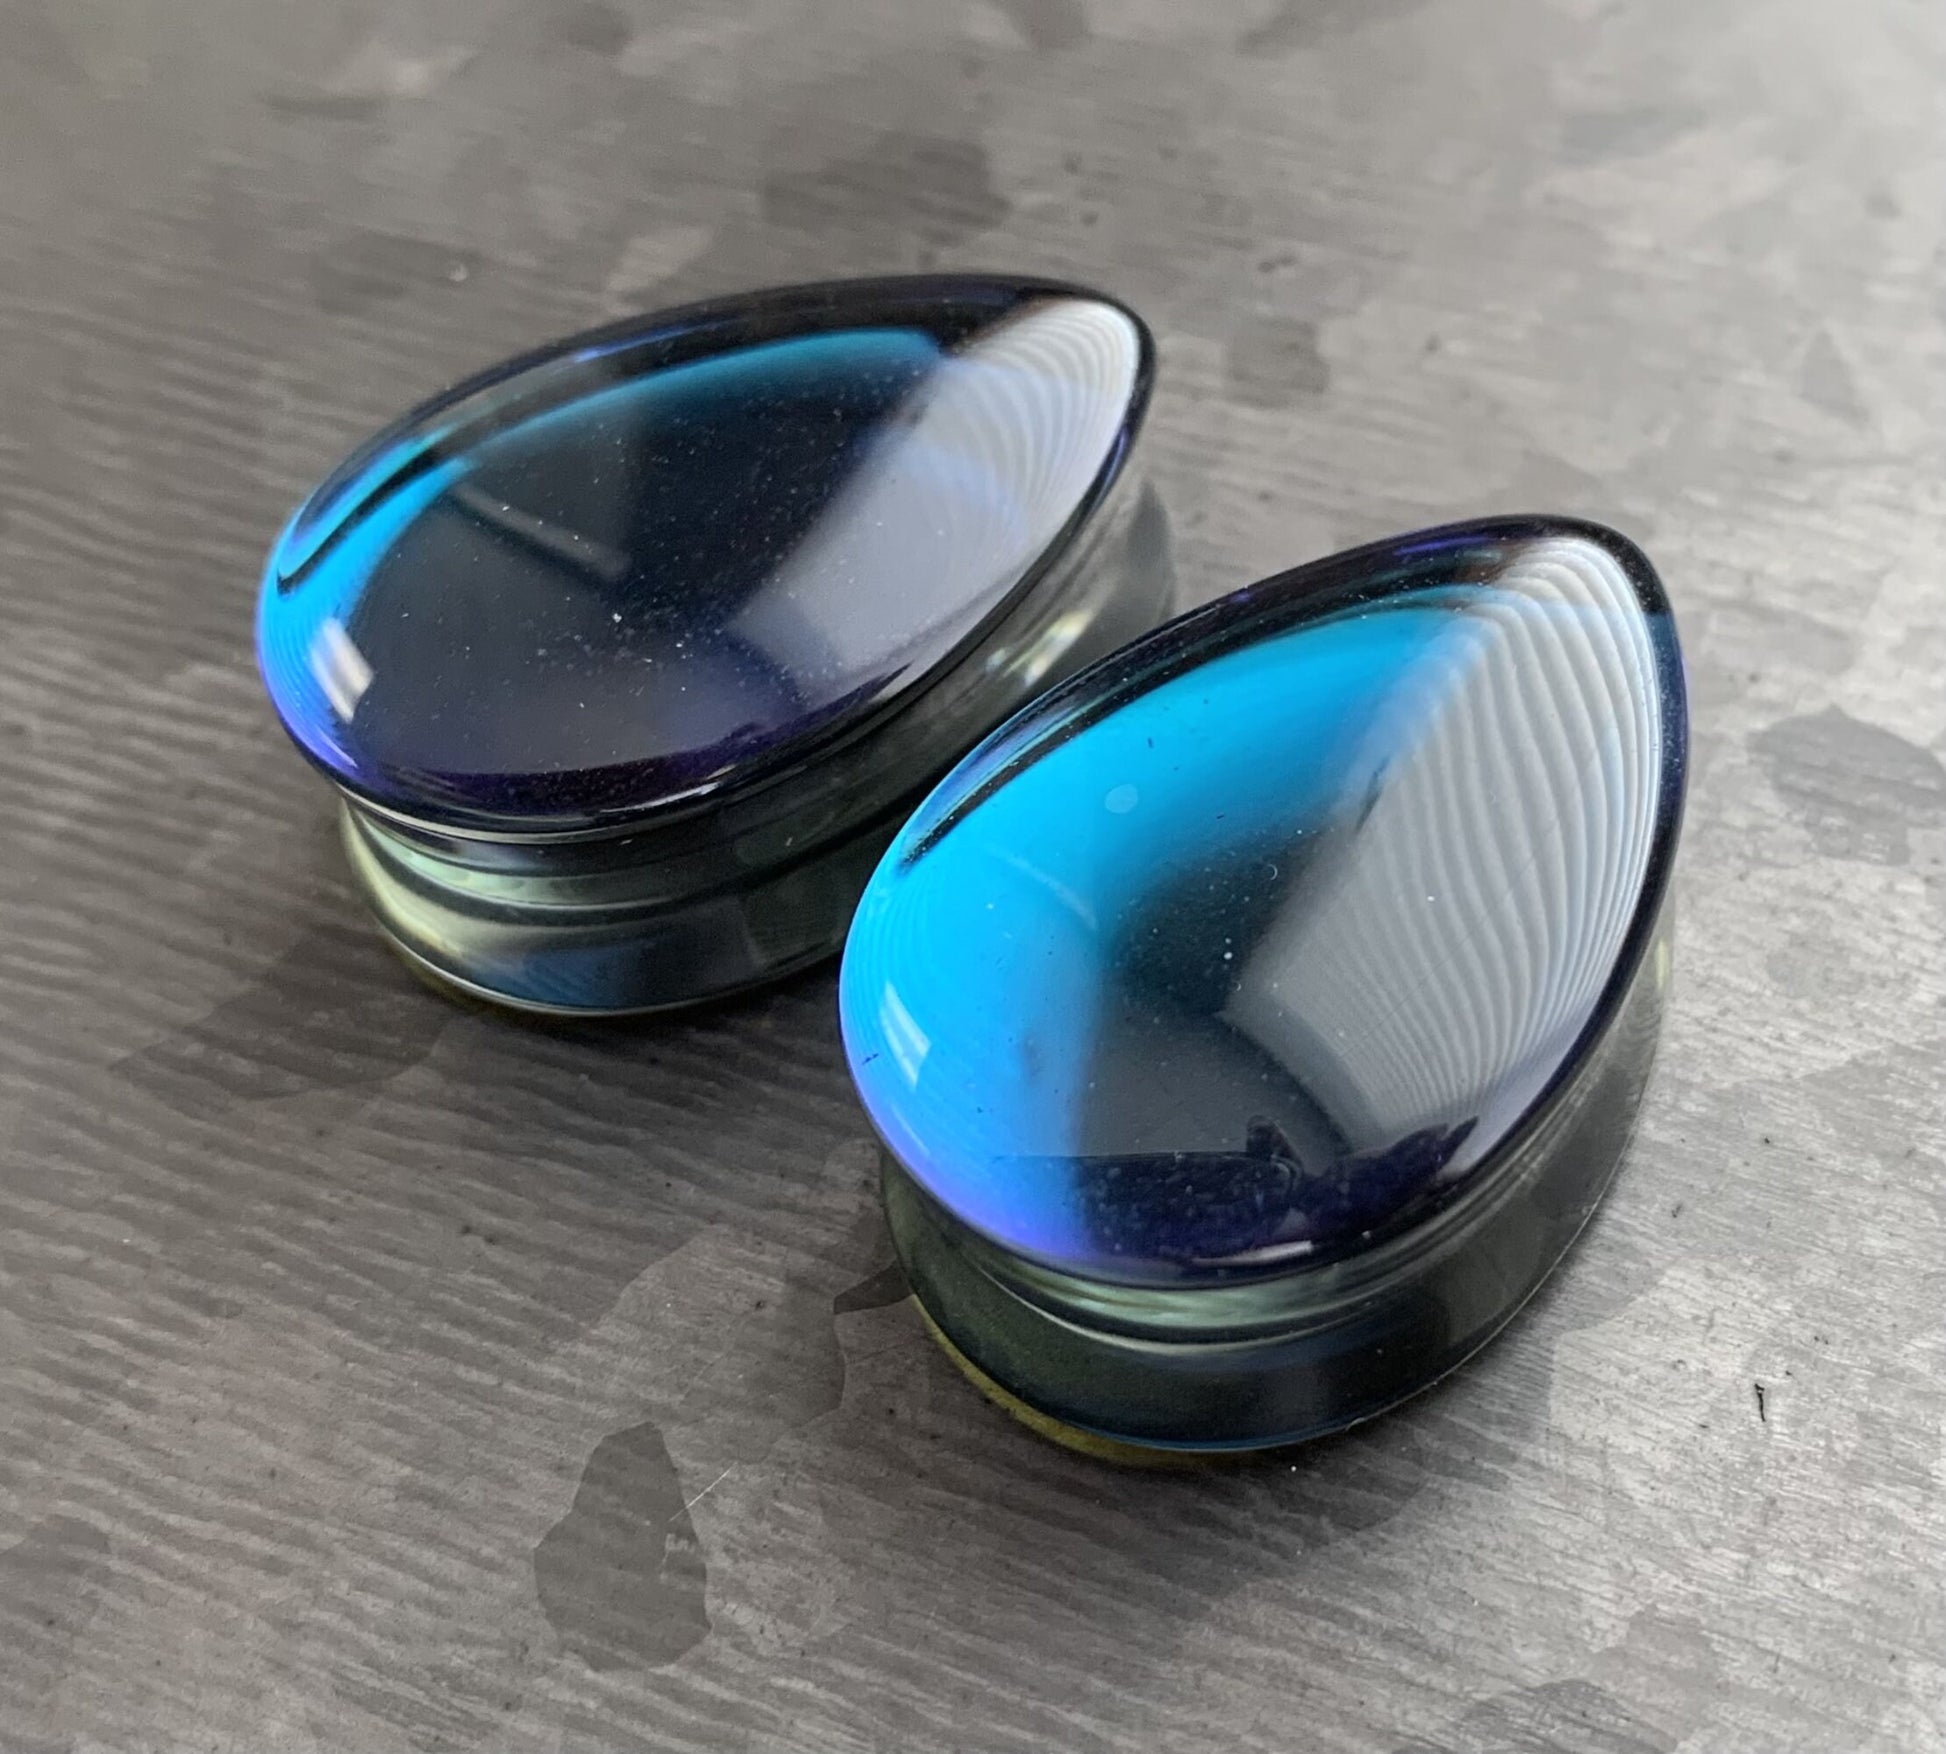 PAIR of Unique Midnight Moonstone Iridescent Double Flare Glass Teardrop Plugs - Gauges 2g (6mm) thru 1" (25mm) available!